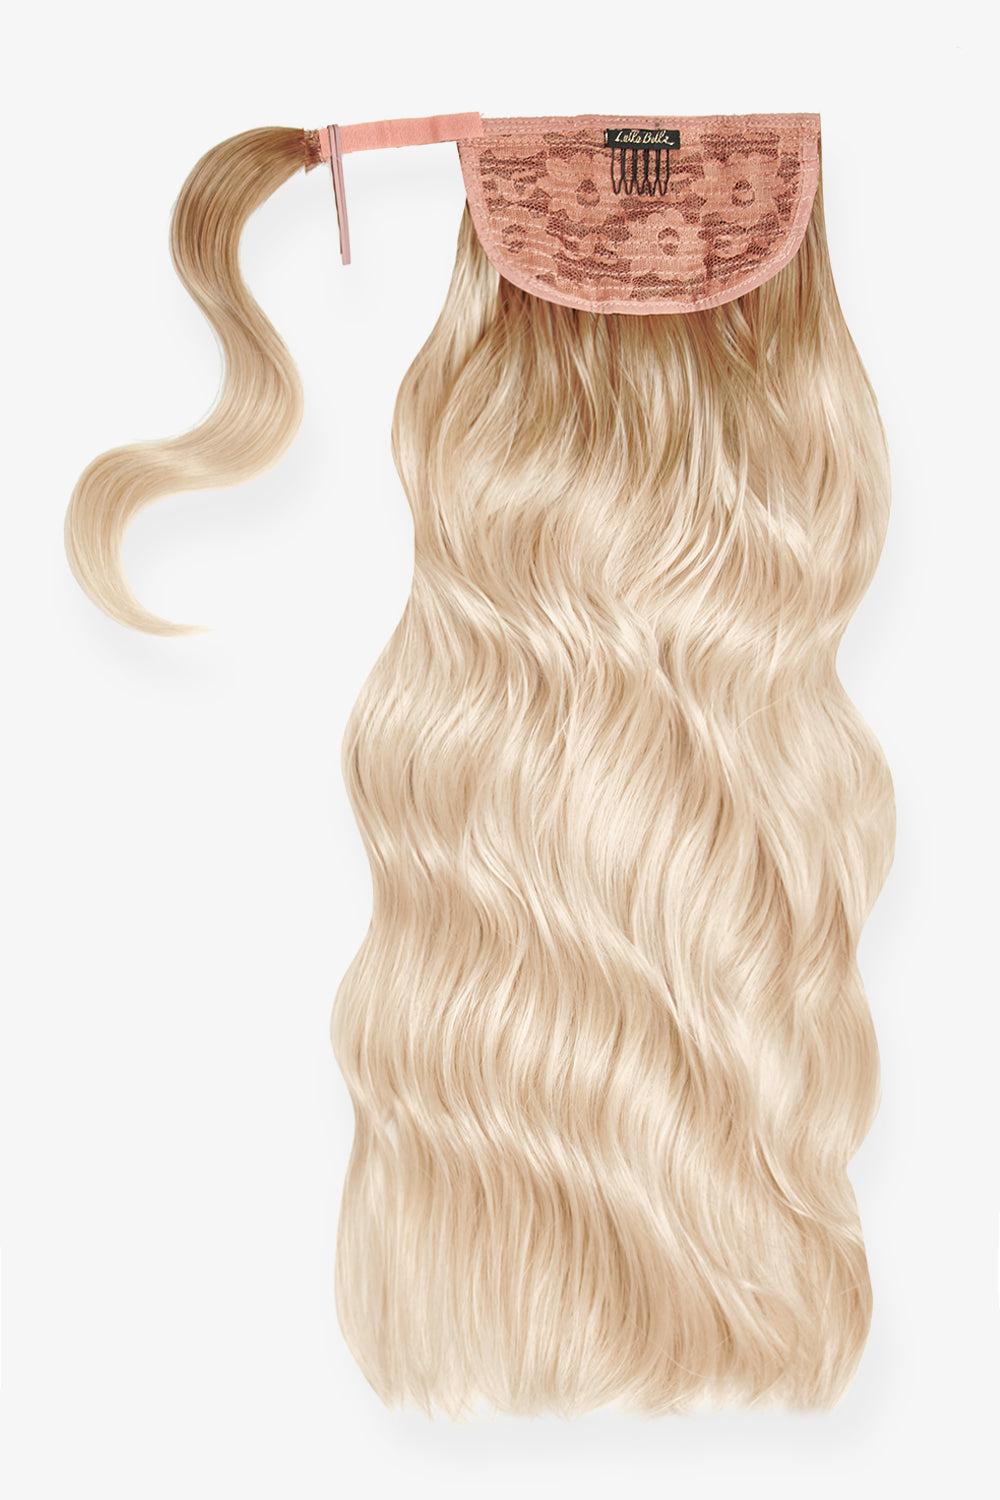 Midi Grande Brushed Out Wave 22’’ Wraparound Pony - Rooted Light Blonde